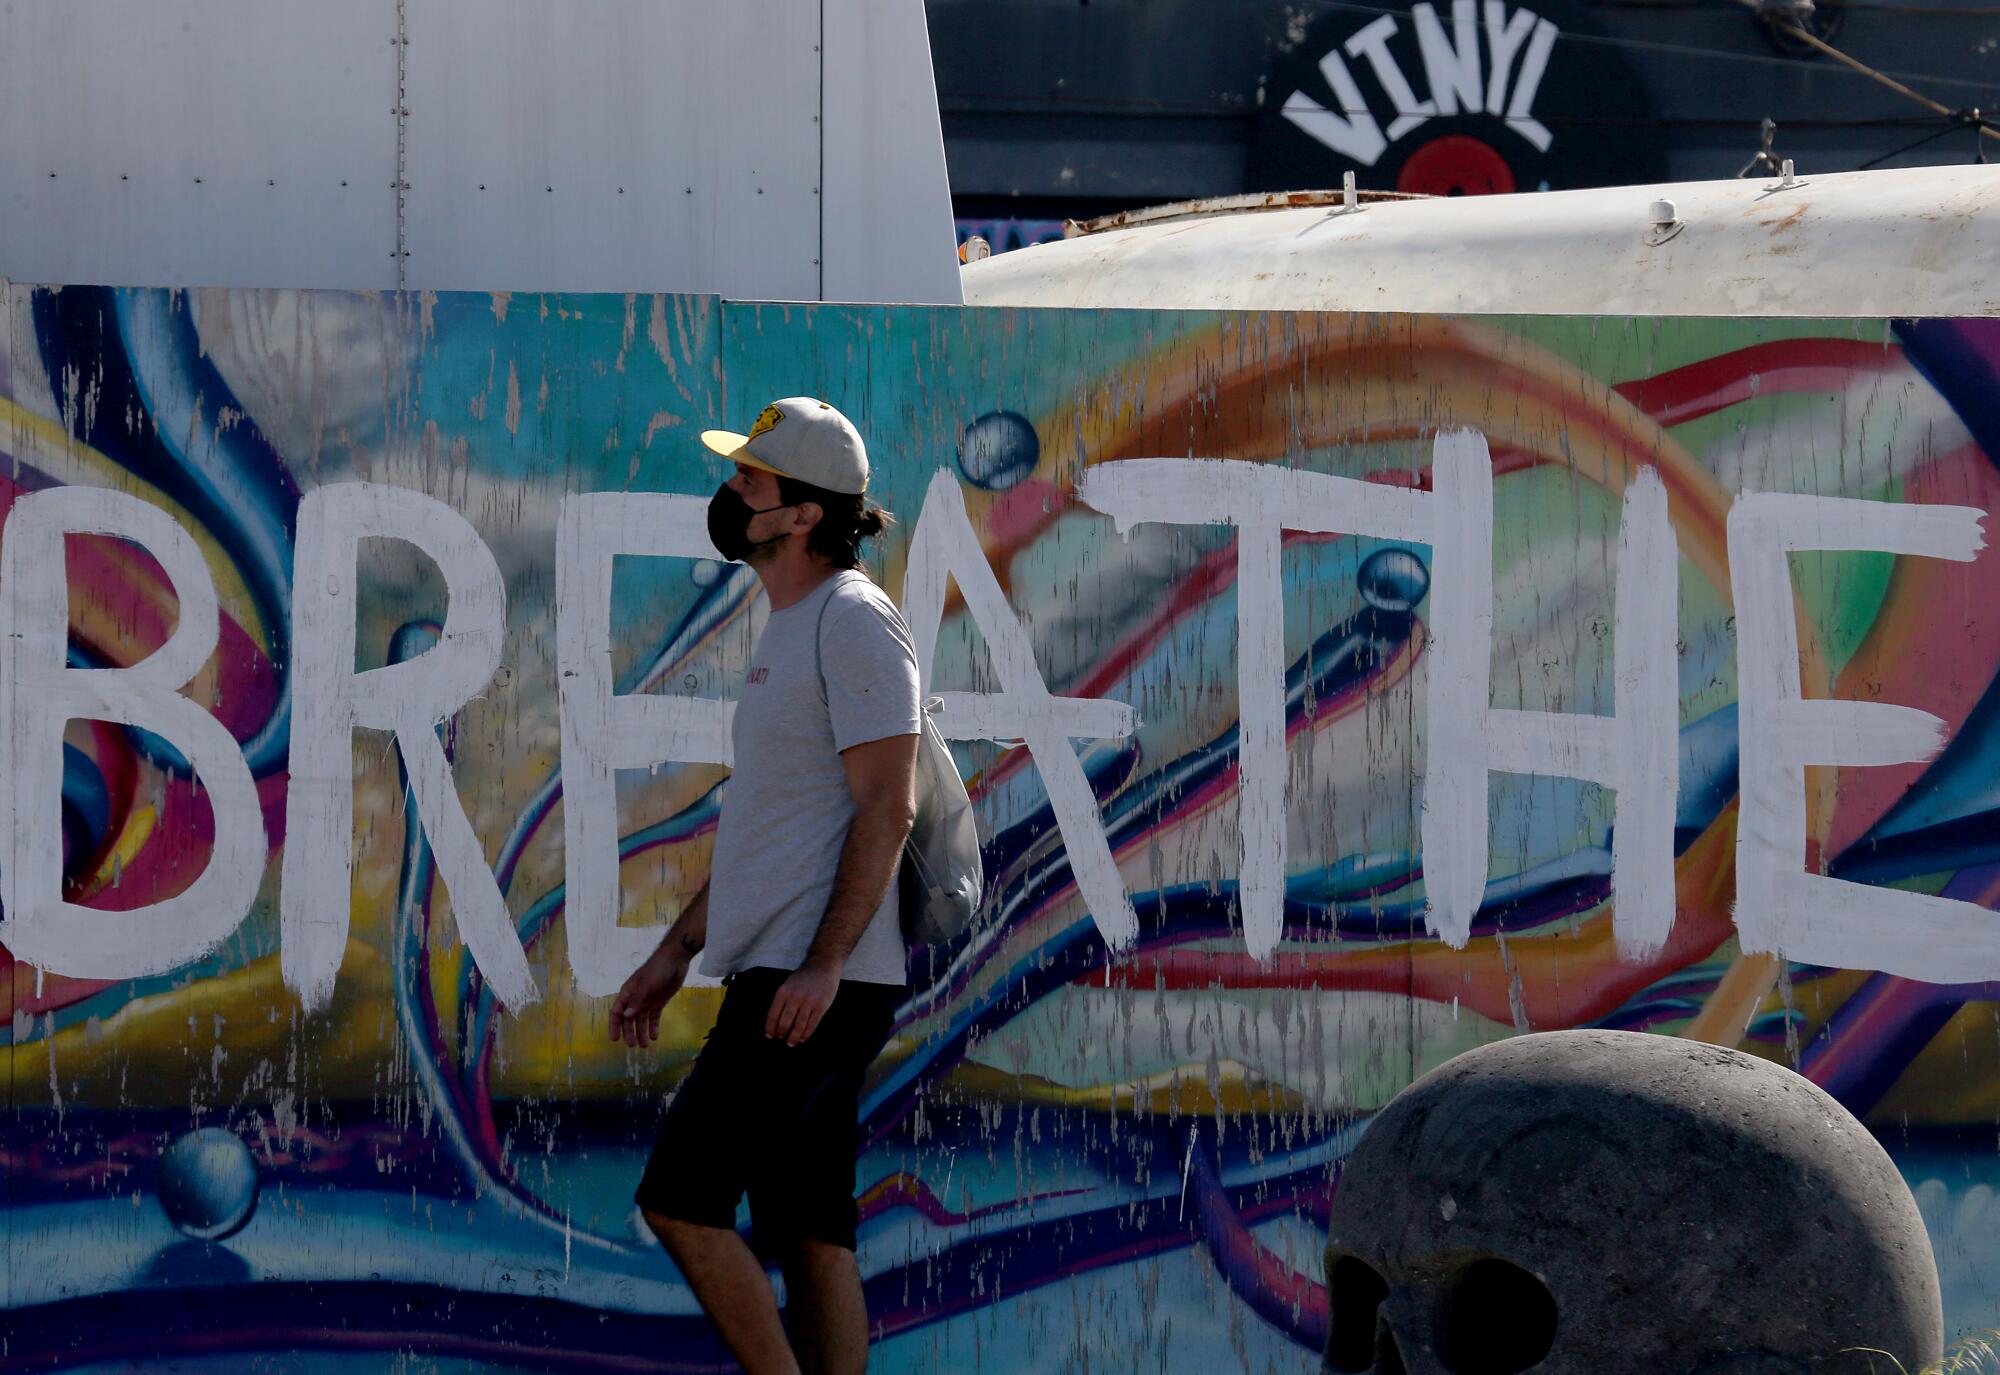 A pedestrian walks past a wall painted with George Floyd's final words, "I can't breathe," along Lincoln Boulevard in Venice.